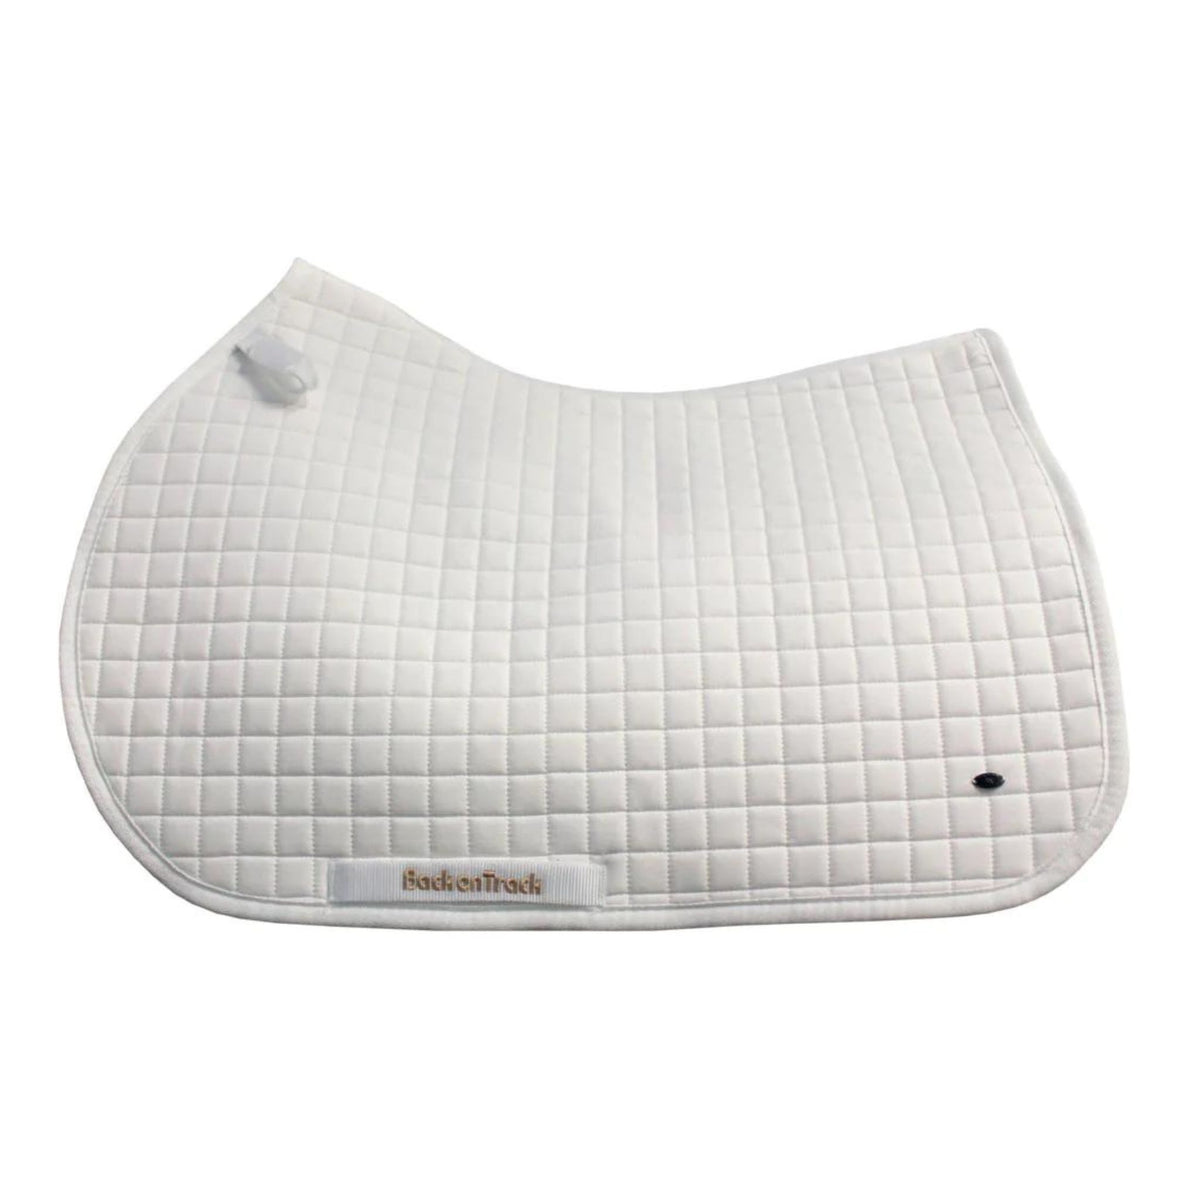 White saddle pad with keepers in a all purpose shape.